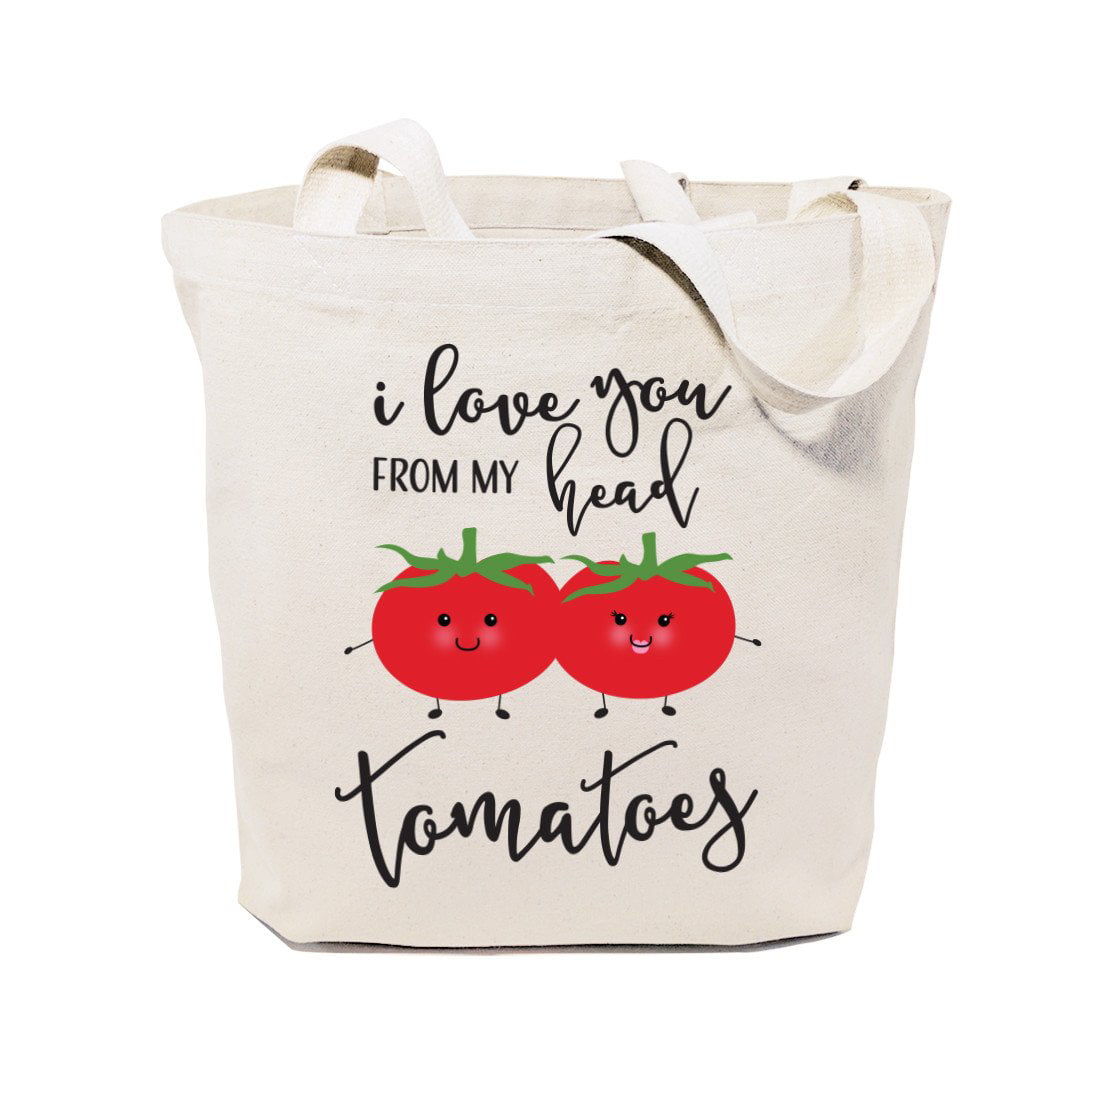 I Love You From My Head Tomatoes Cotton Canvas Tote Bag - Walmart.com